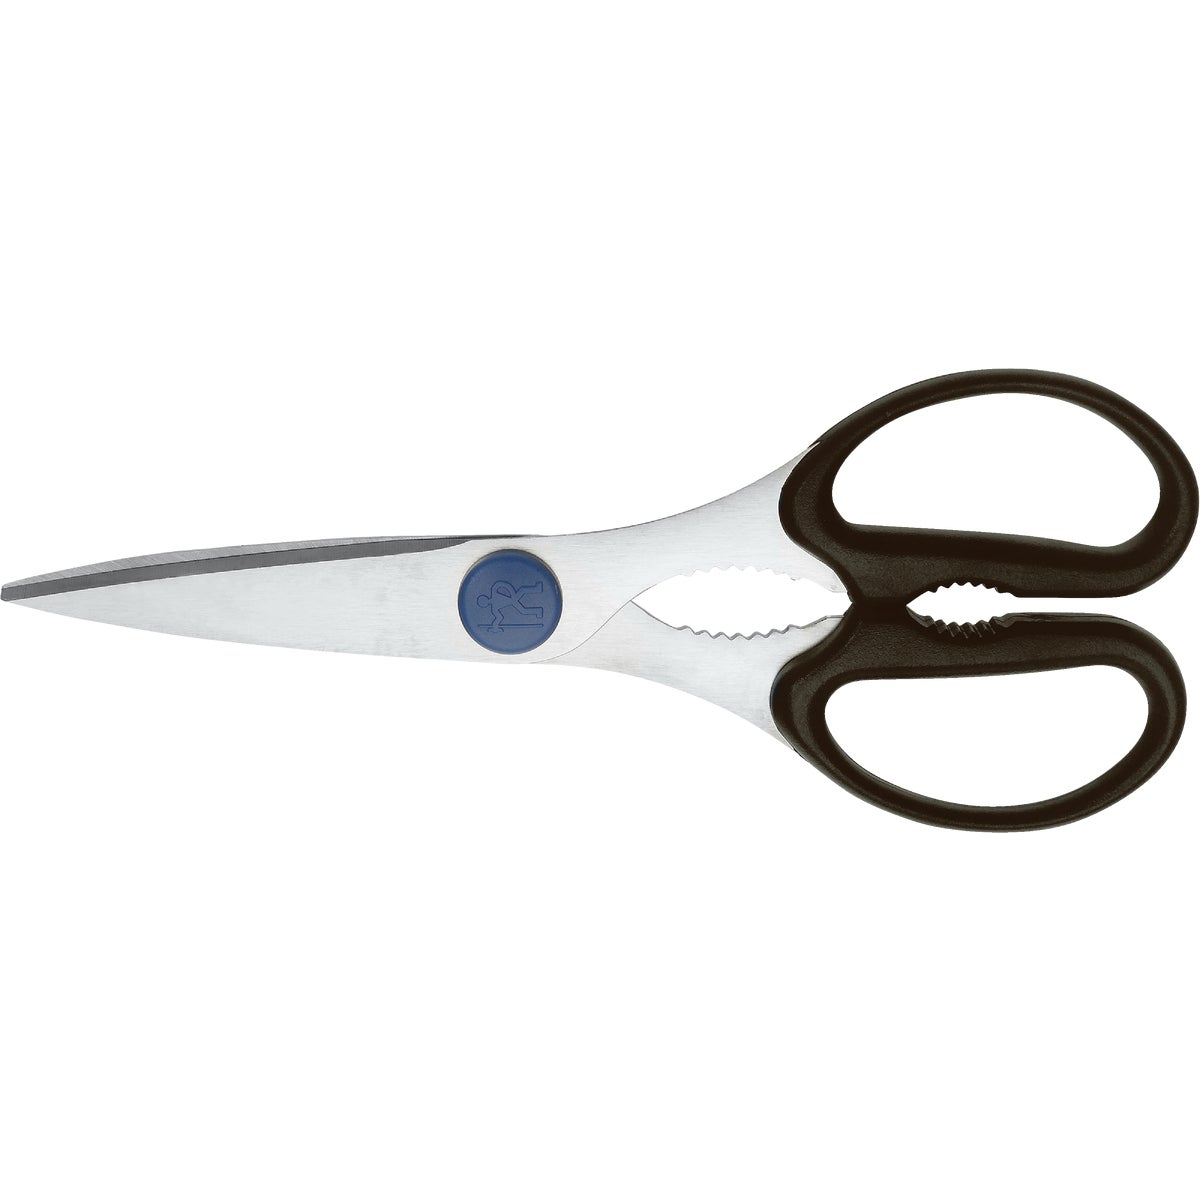 Item 603581, 3 In. stainless steel blade kitchen shear with polypropylene handle.